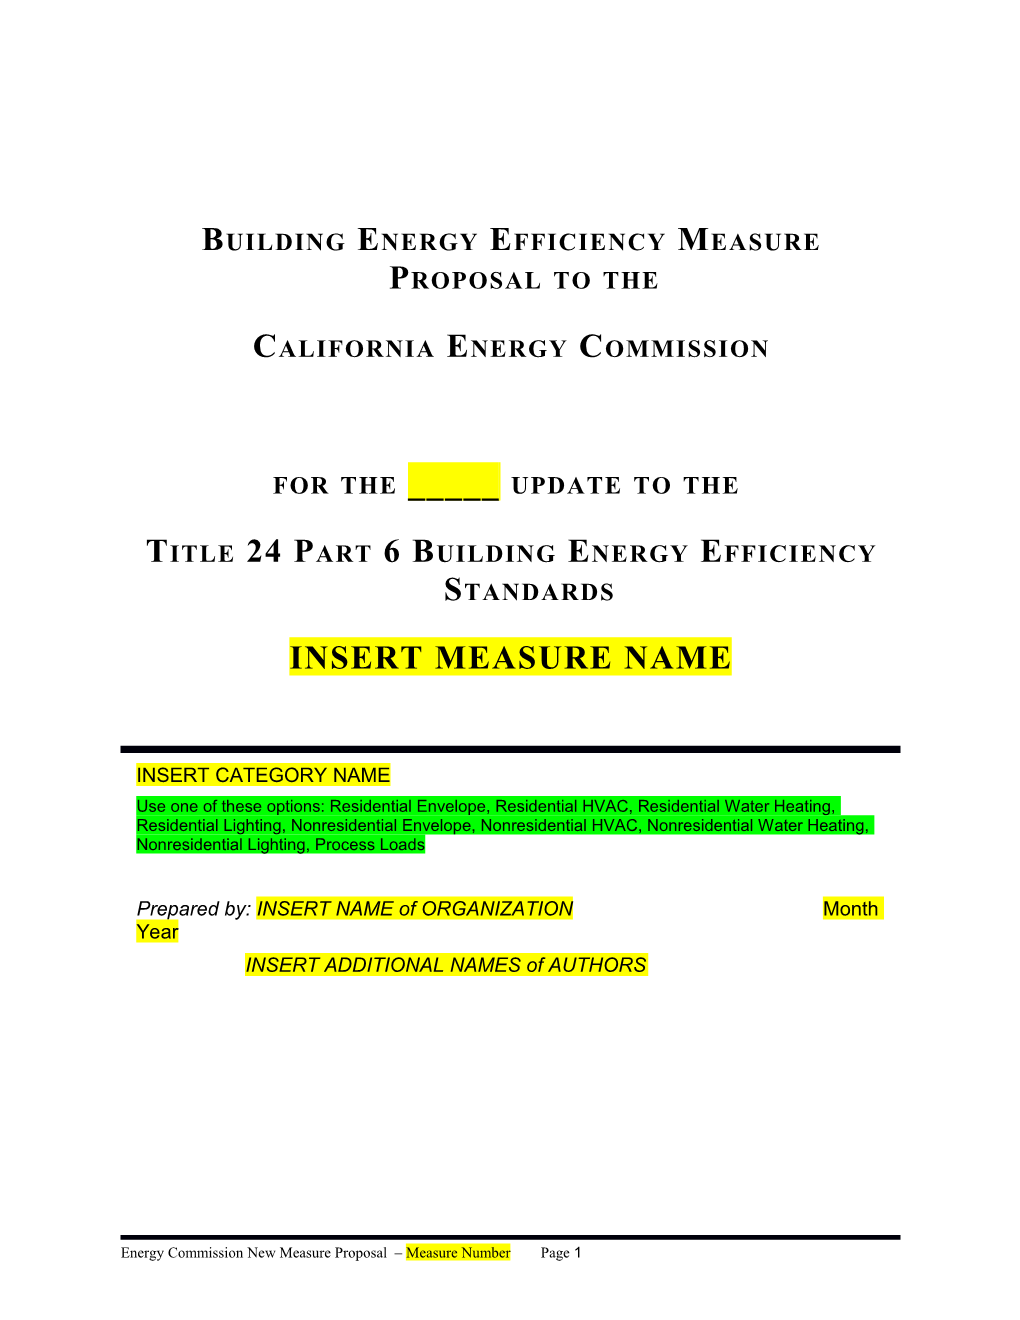 Building Energy Efficiency Measure Proposal to The